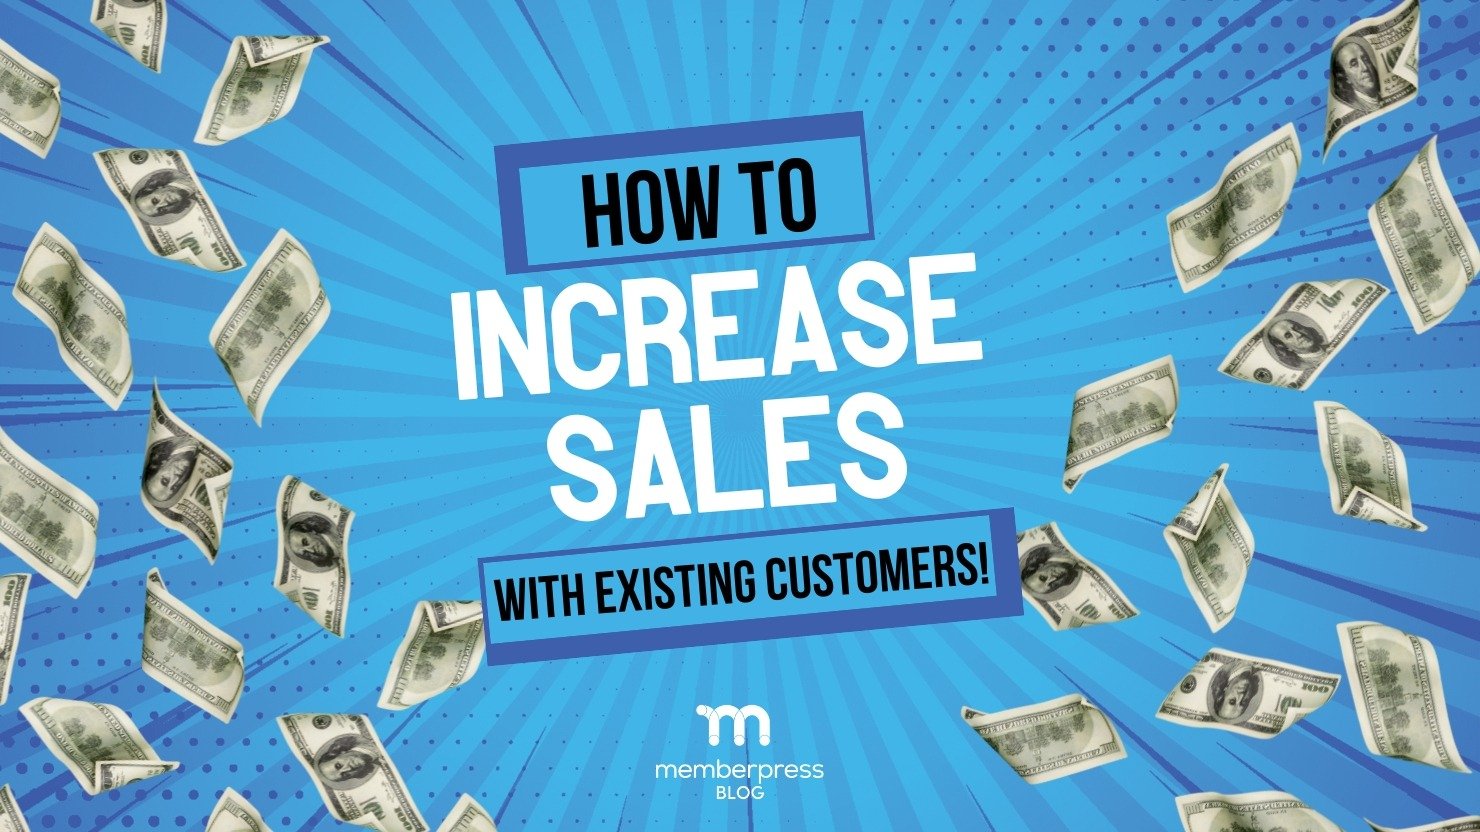 How to Increase Sales with Existing Customers